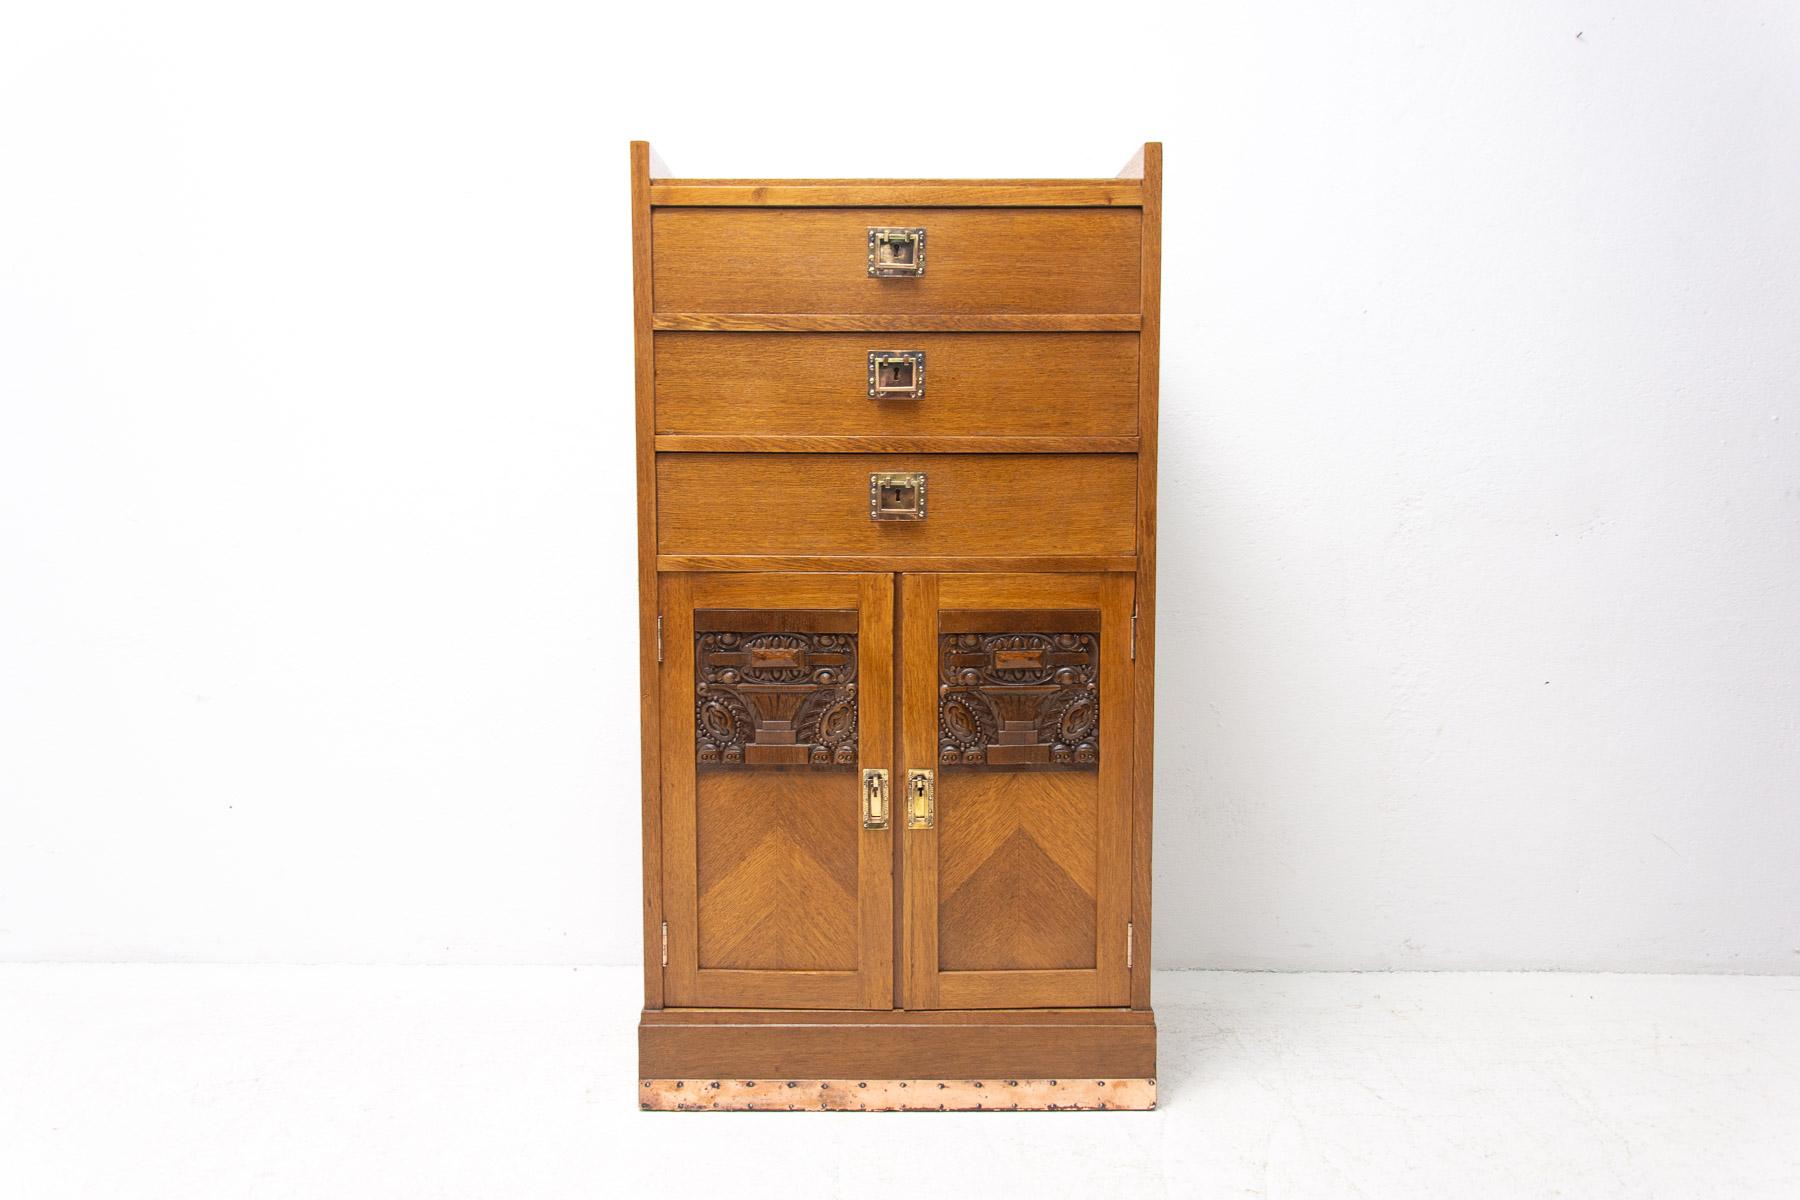 This Secession cabinet was produced in Austria-Hungary, circa 1910. It is made of oak wood and brass. It features three drawers at the top and a storage space at the bottom. It has a beautiful brass fittings with decorative Art Nouveau elements. The